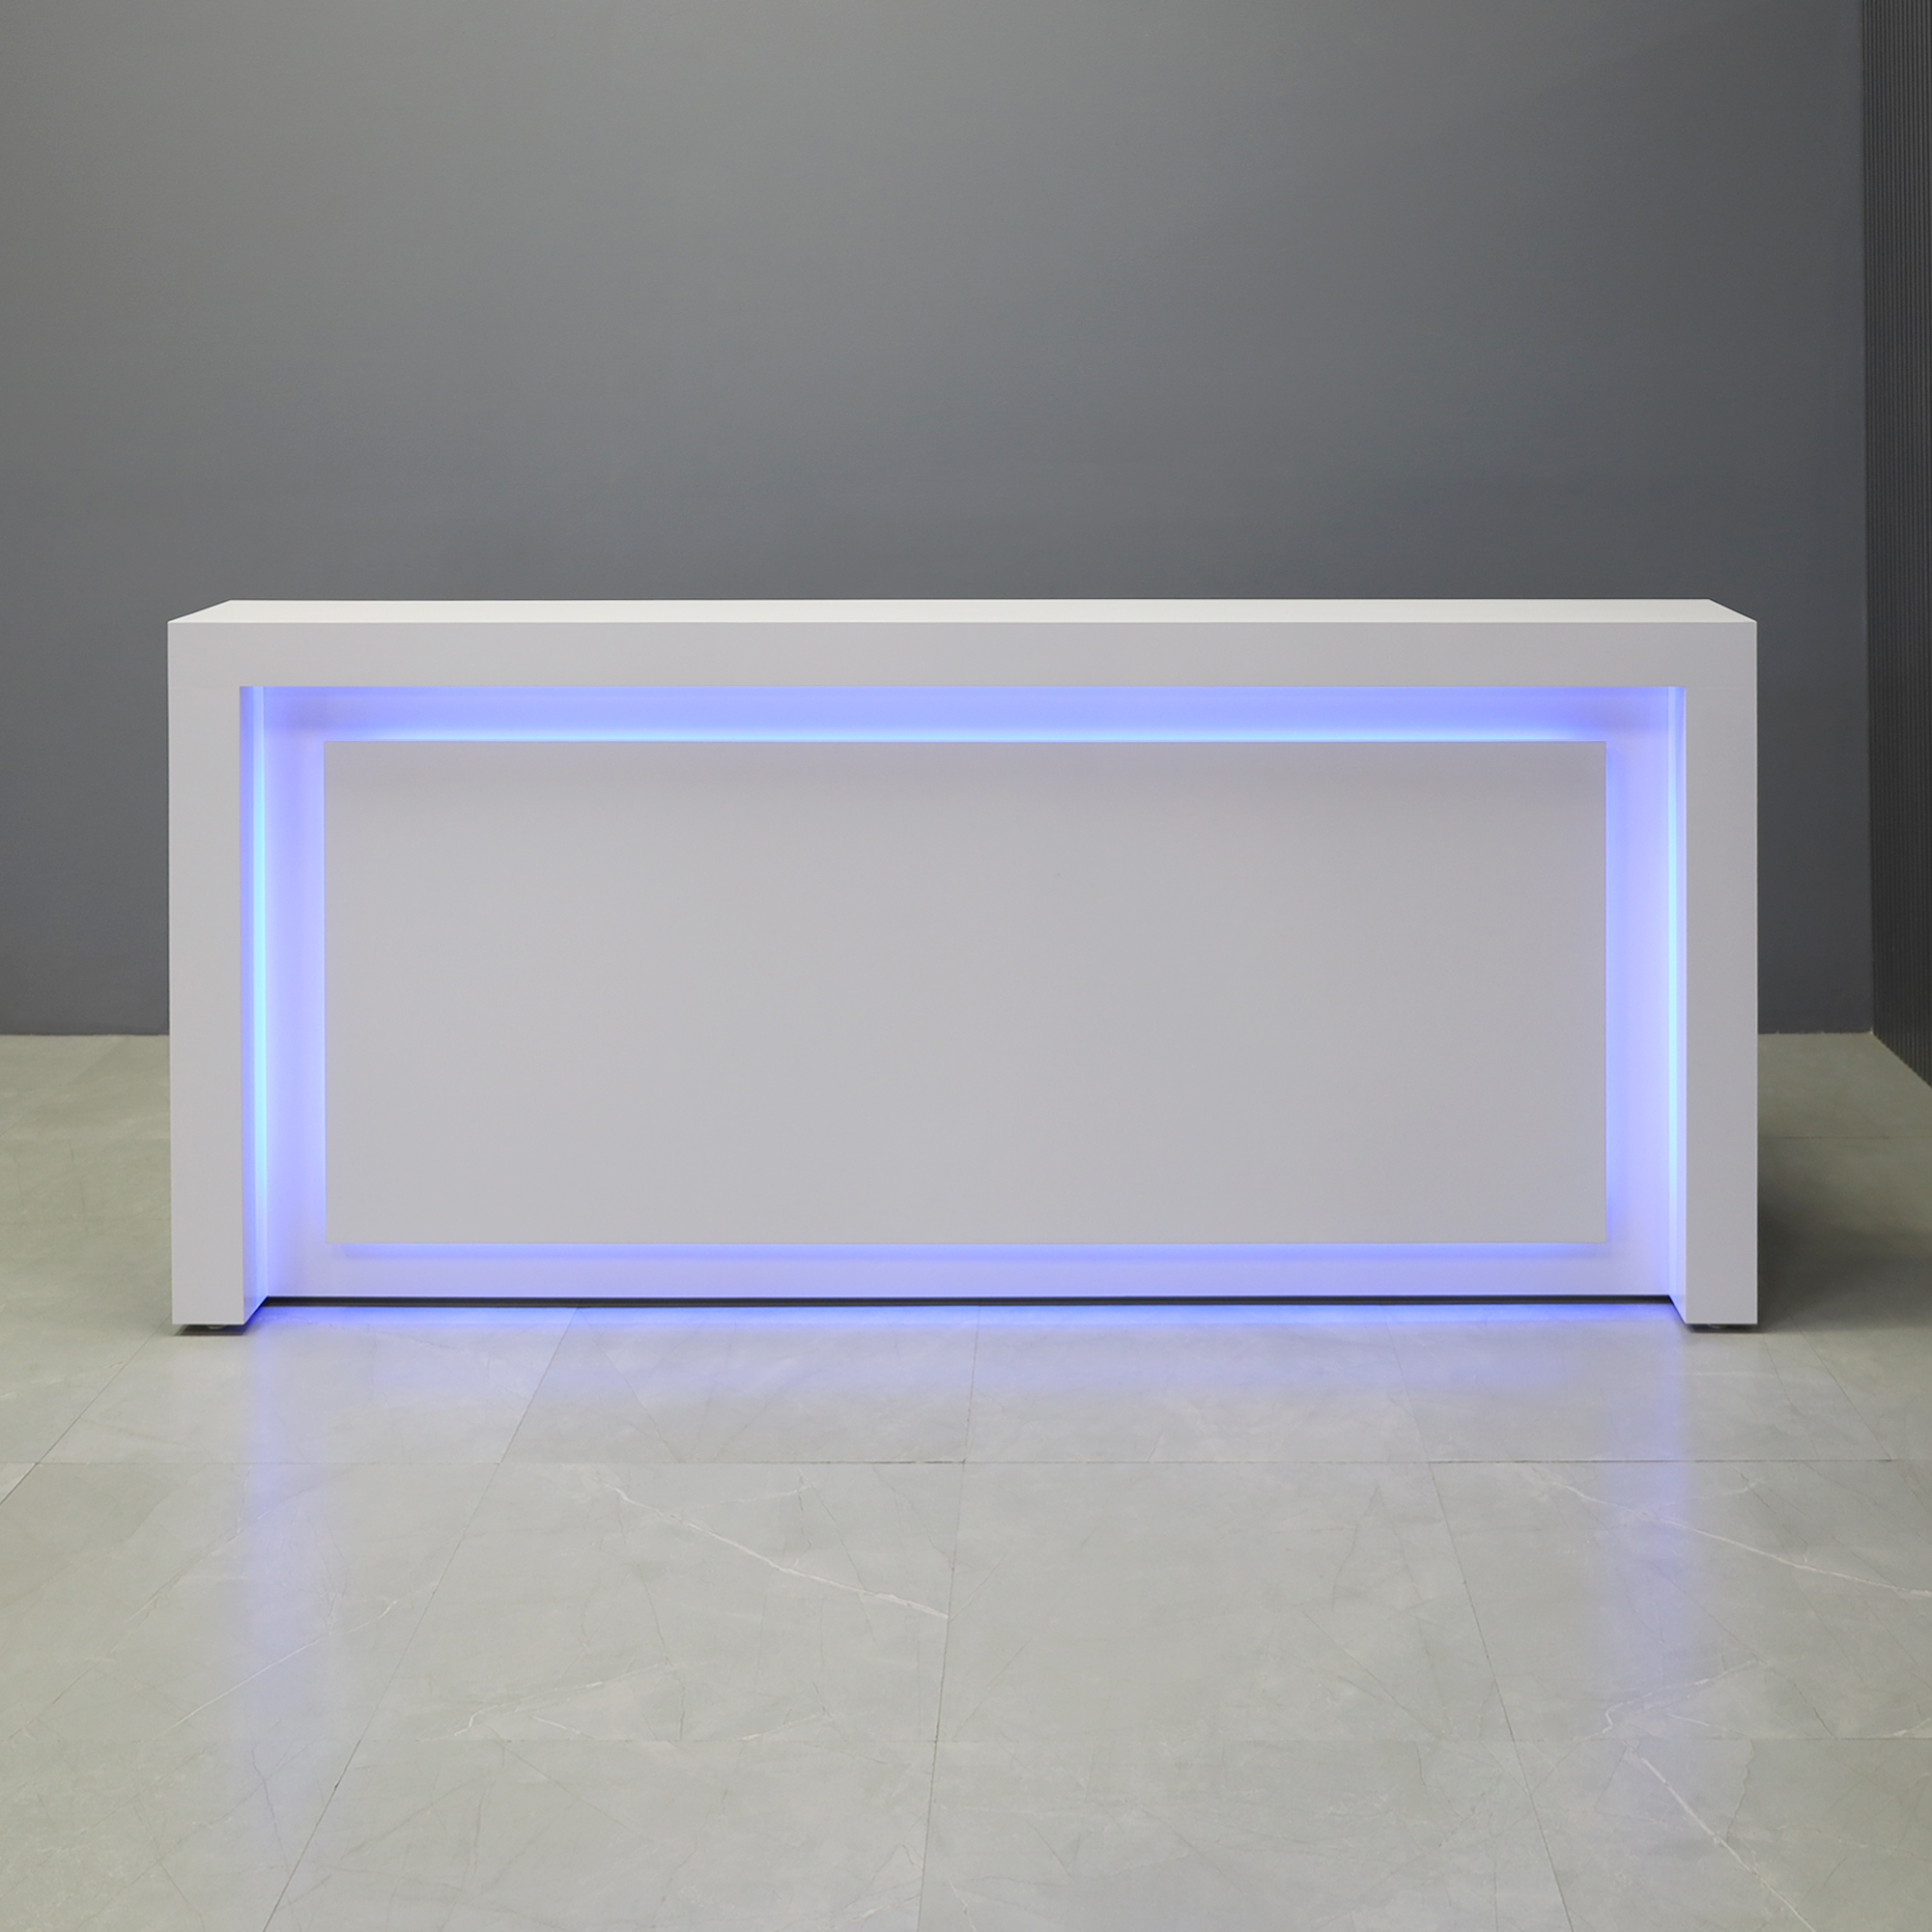 90-inch New York Straight Reception Desk in white gloss laminate finish, with multi-colored LED, shown here.